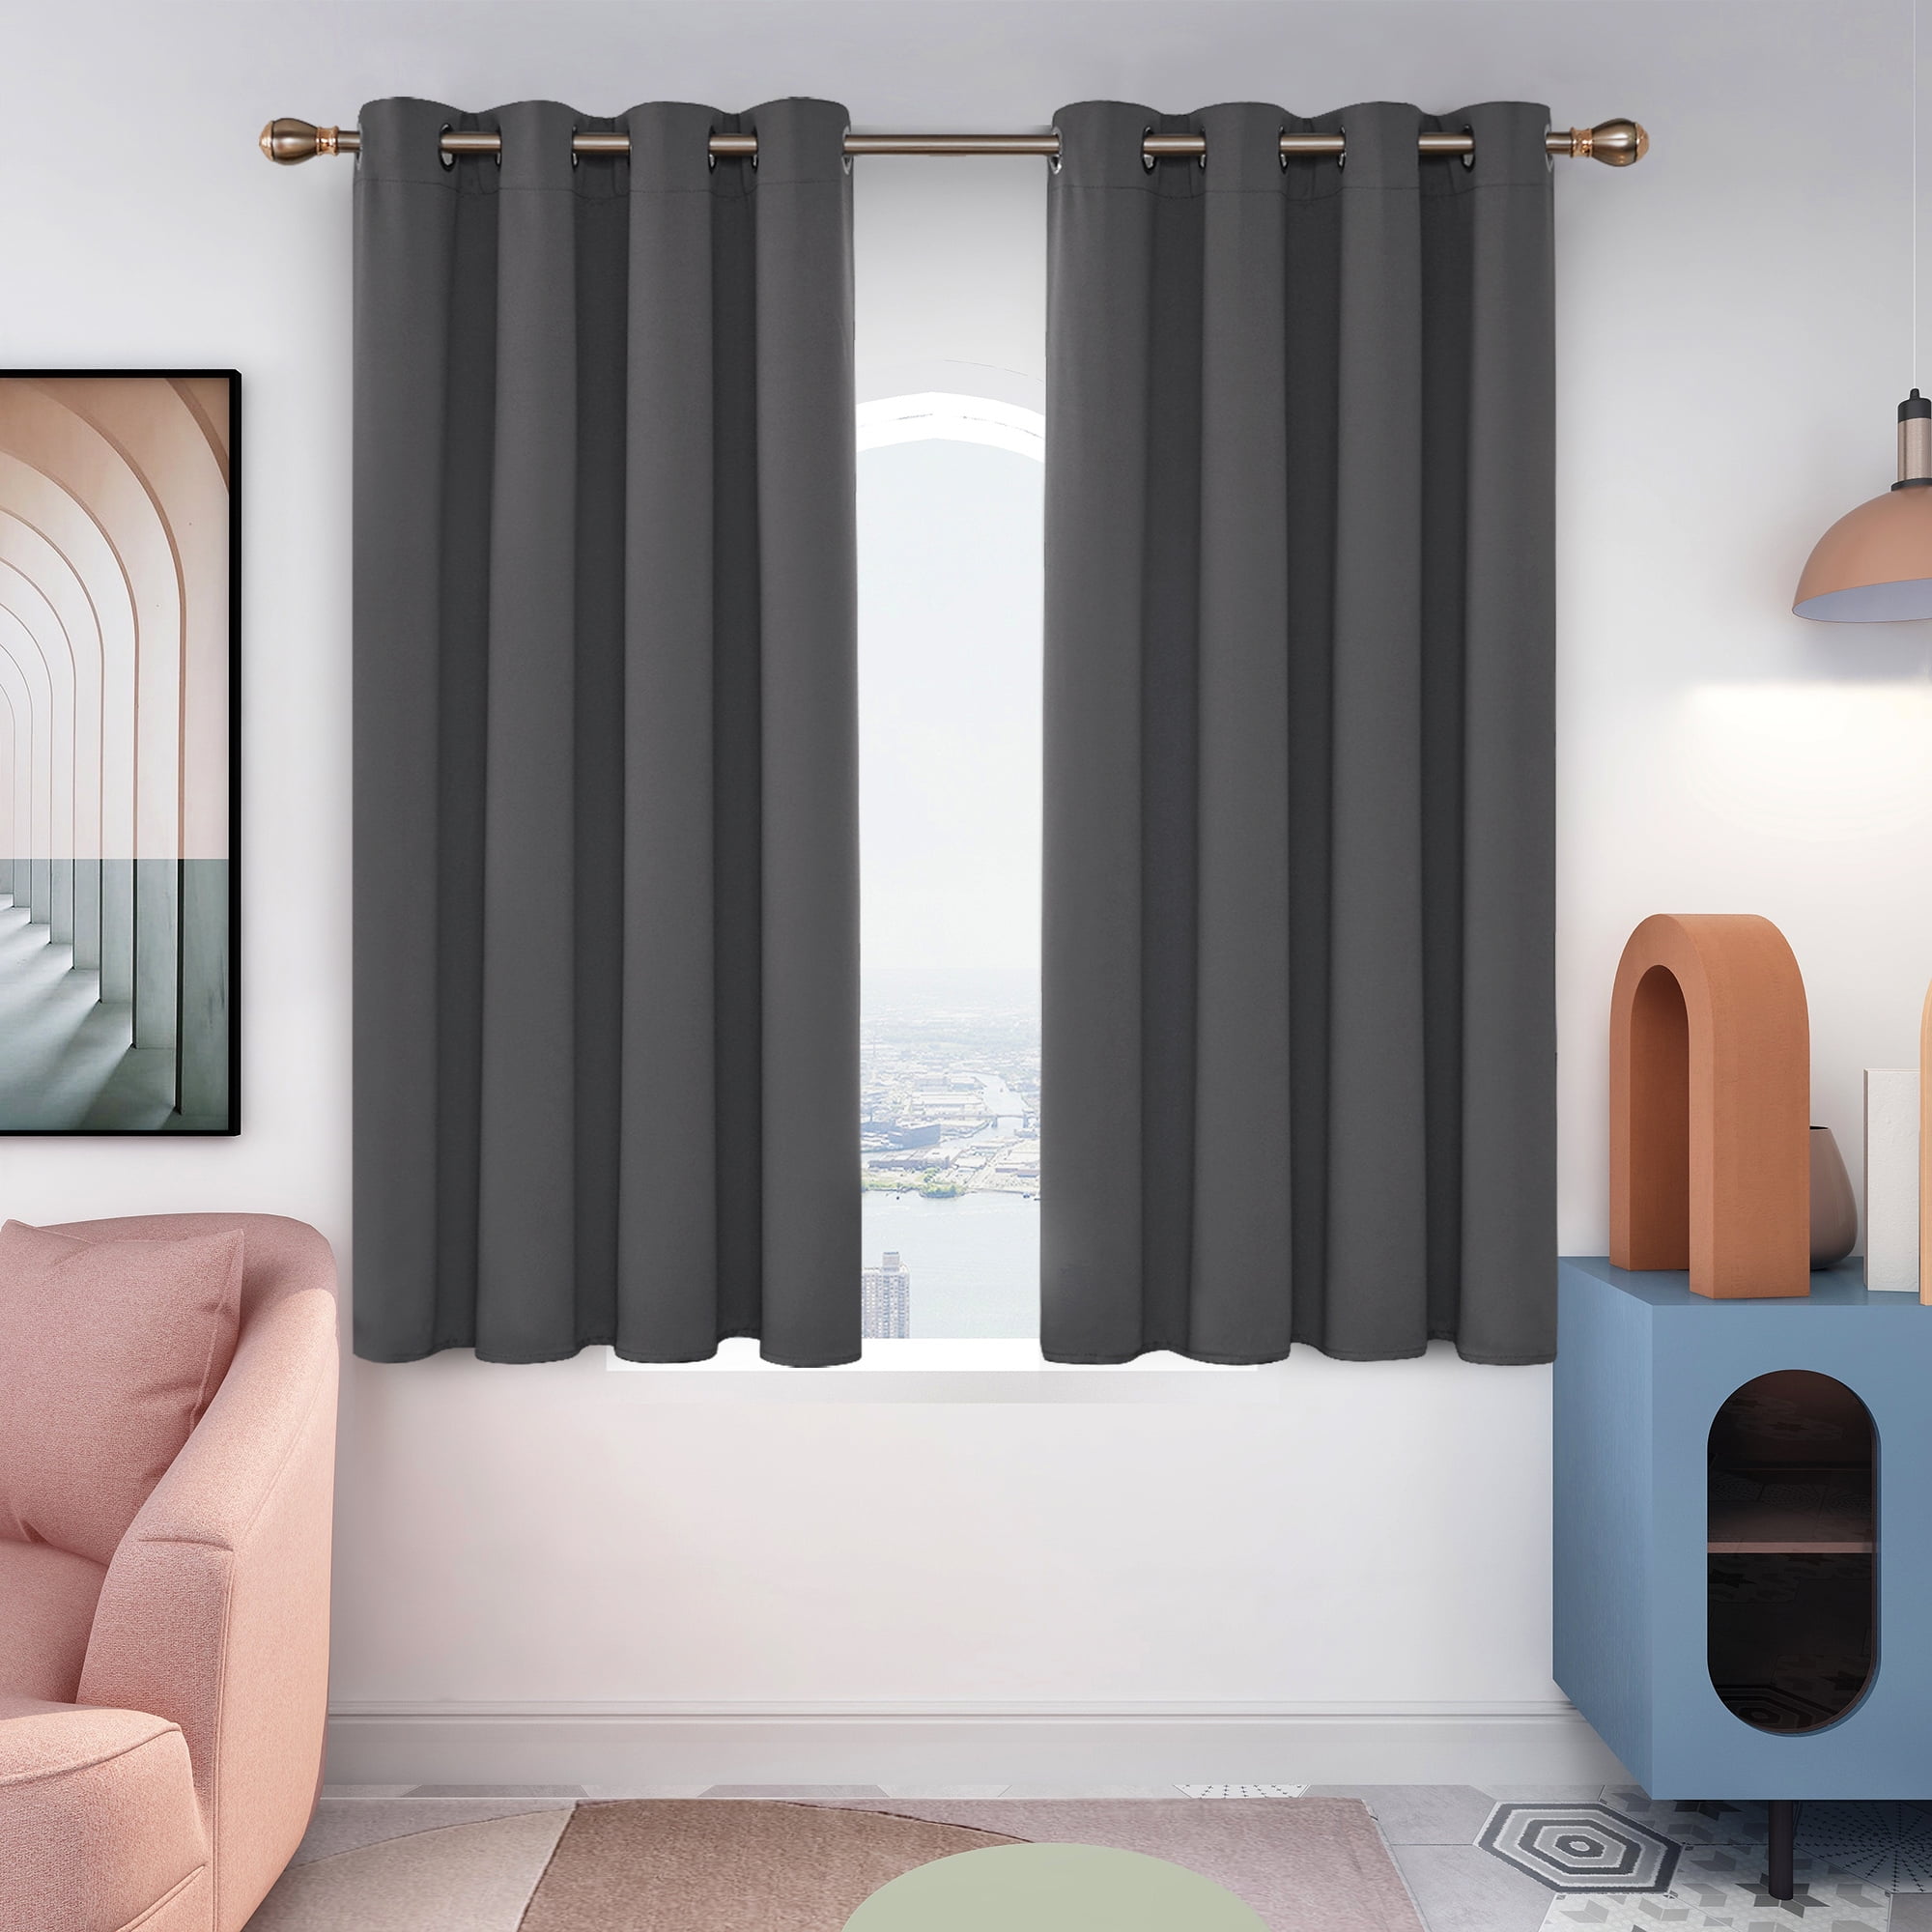 Deconovo Dark Gray Small Blackout Curtains for Kitchen - Grommet Thermal Insulated Room Darkening Short Curtains (52 x 45 inch, Dark Gray, Set of 2 Panels)